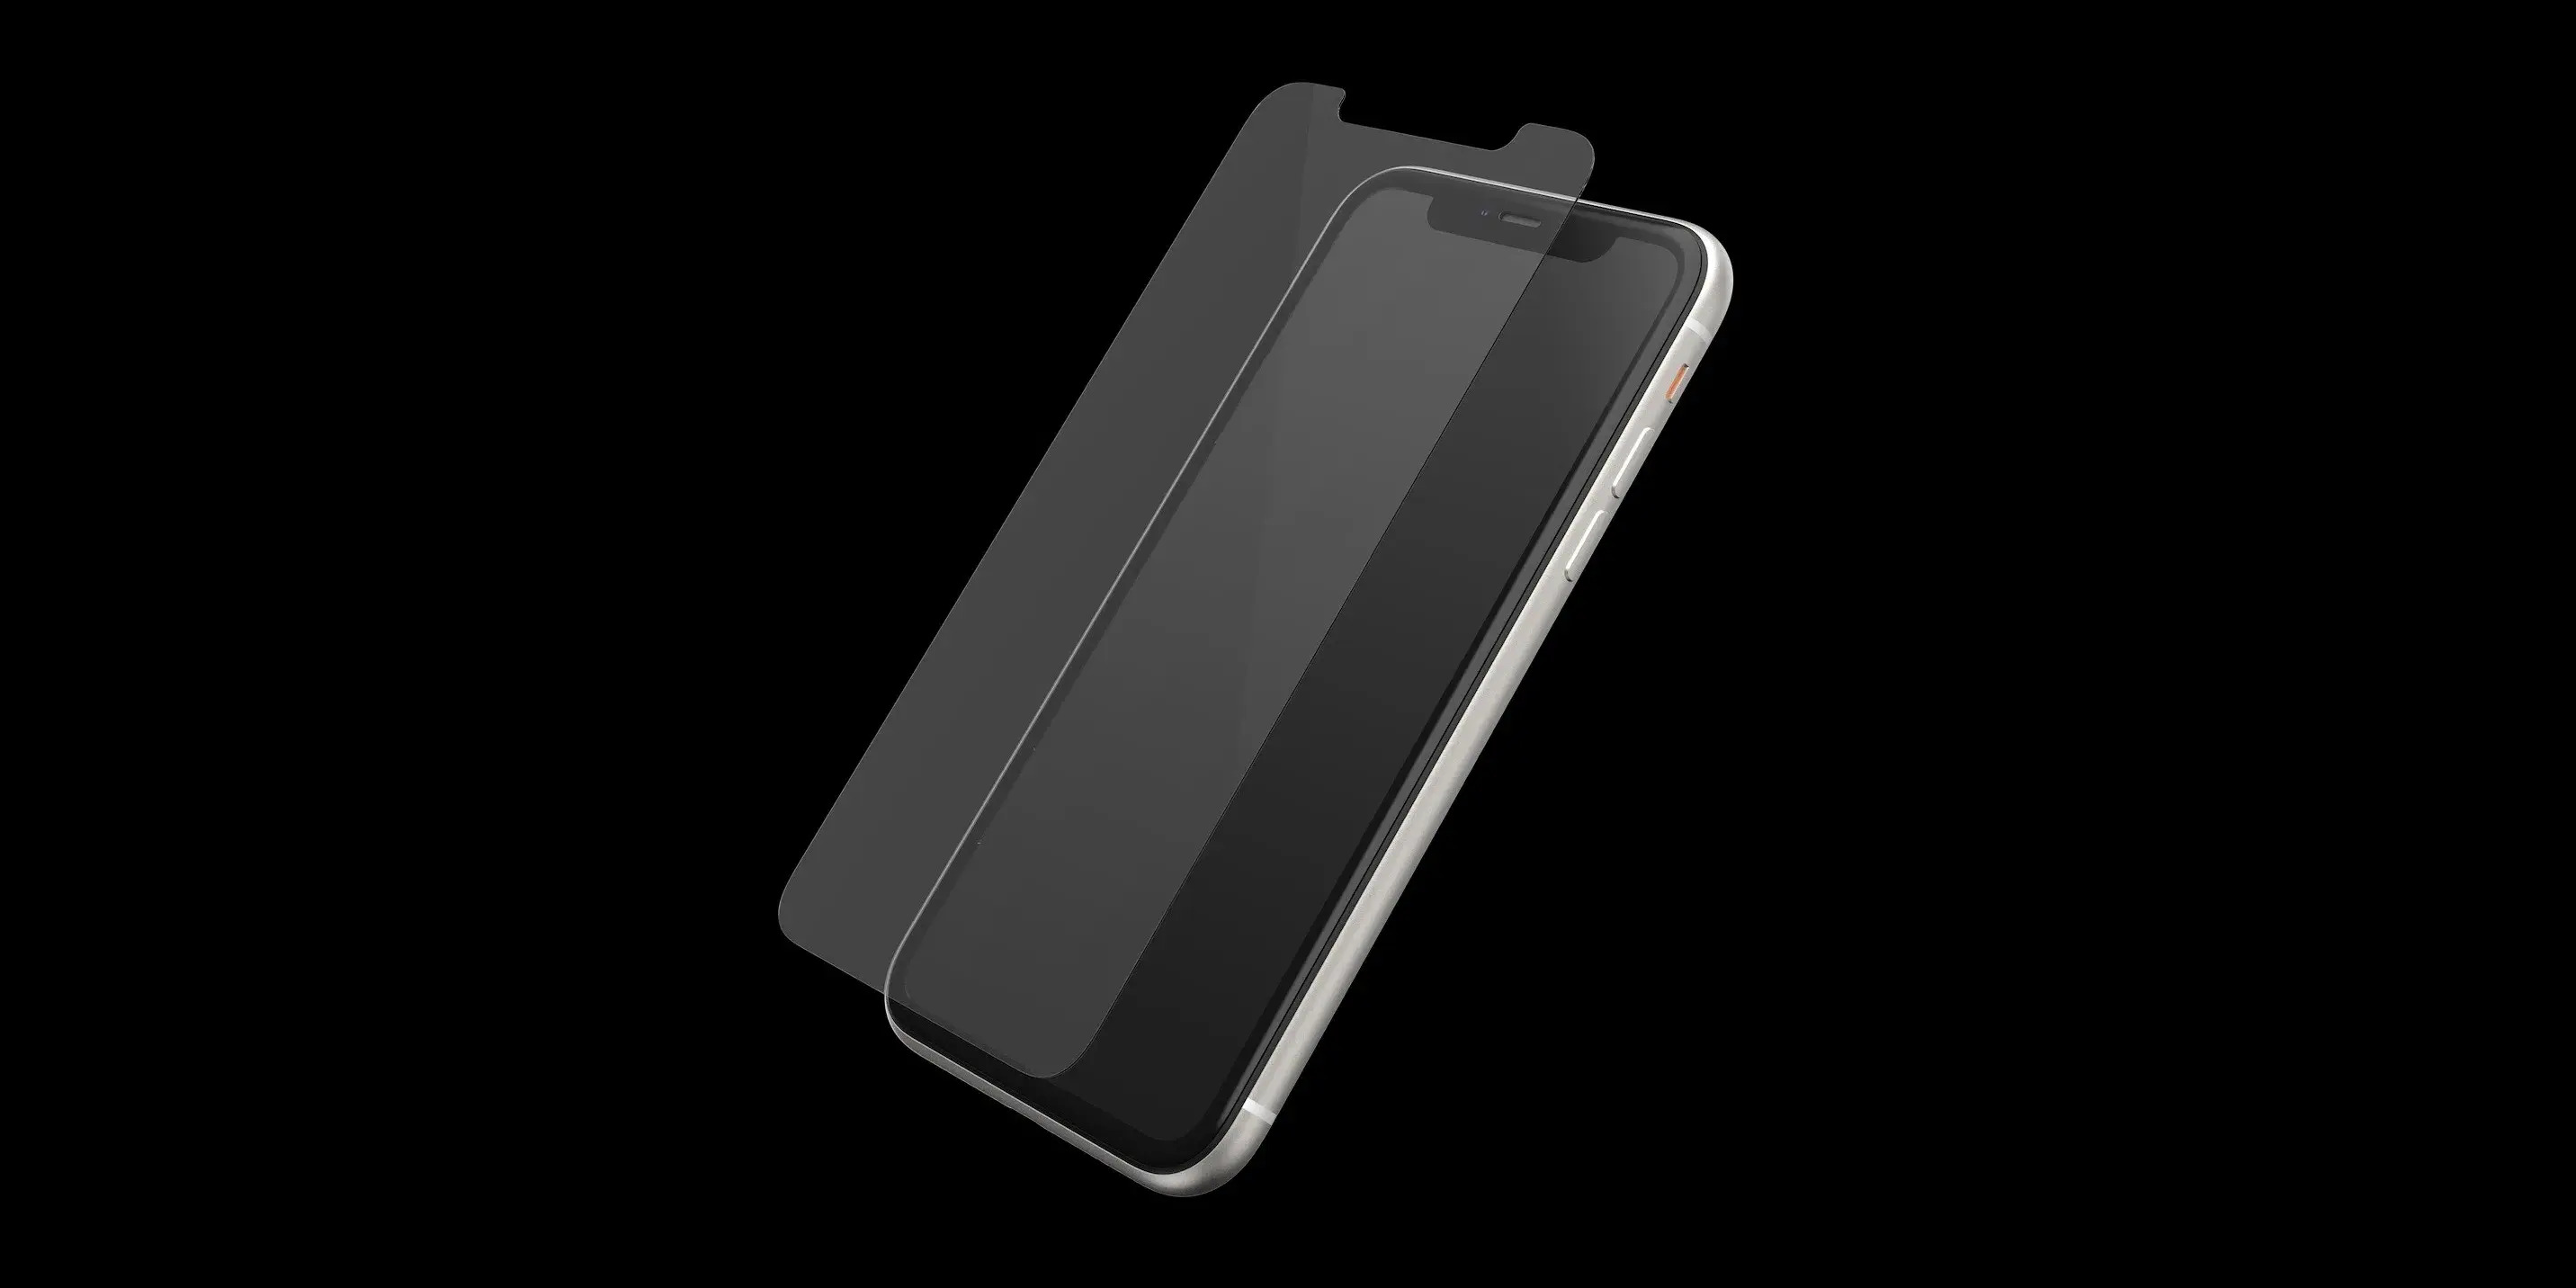 Otterbox Screen Protector: Clarifying Features For IPhone 10